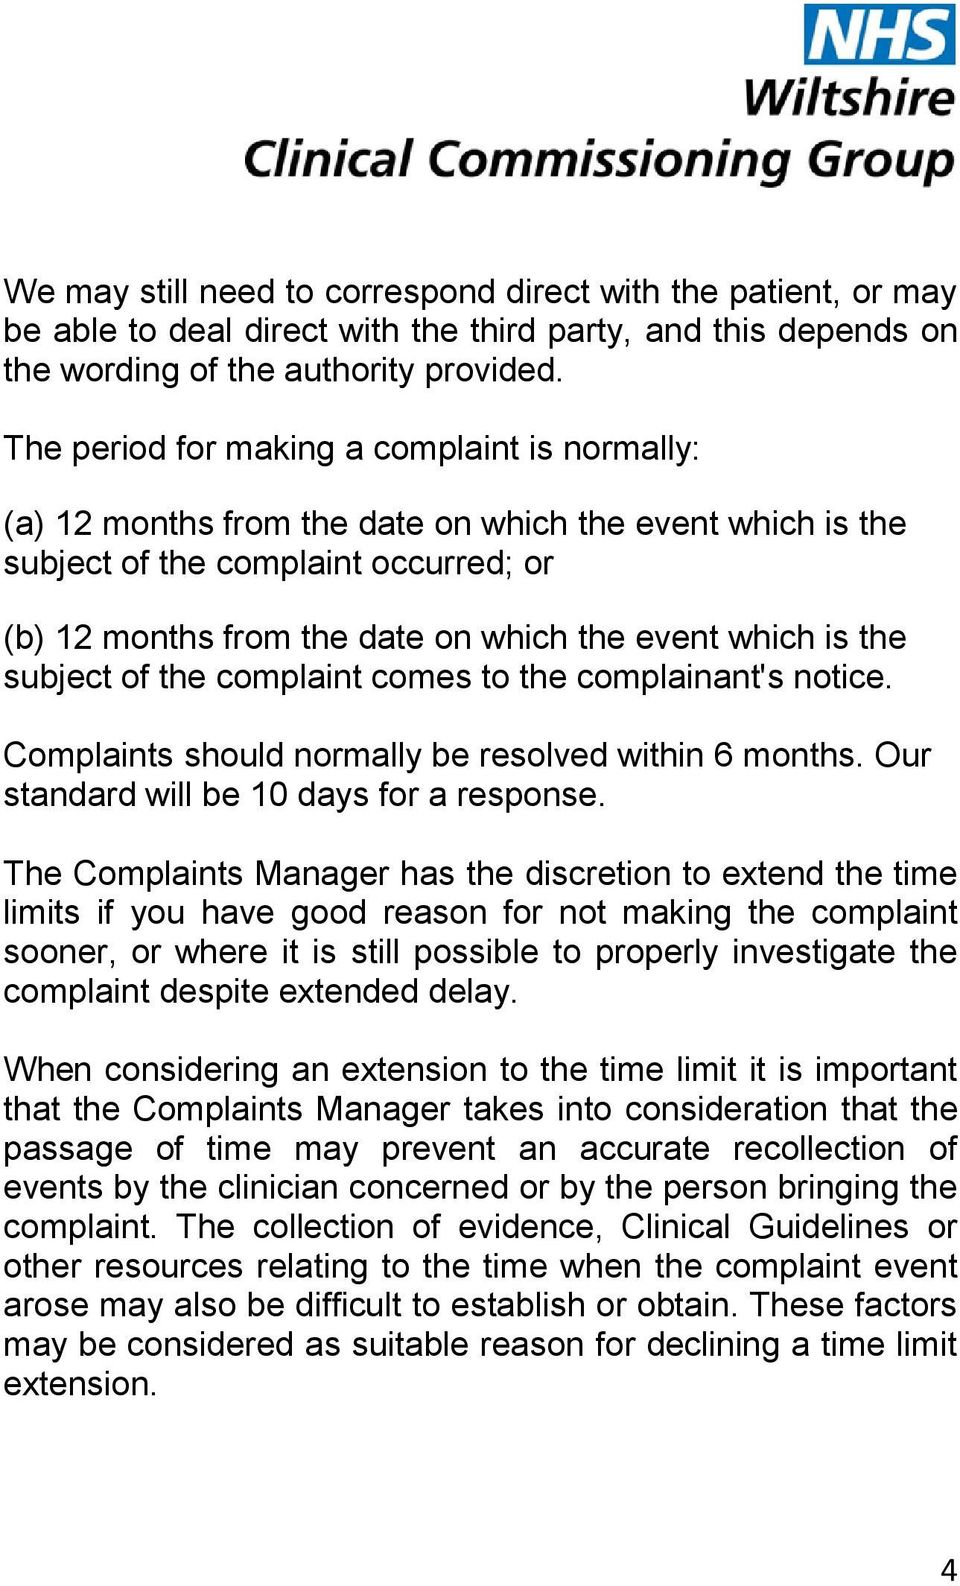 is the subject of the complaint comes to the complainant's notice. Complaints should normally be resolved within 6 months. Our standard will be 10 days for a response.